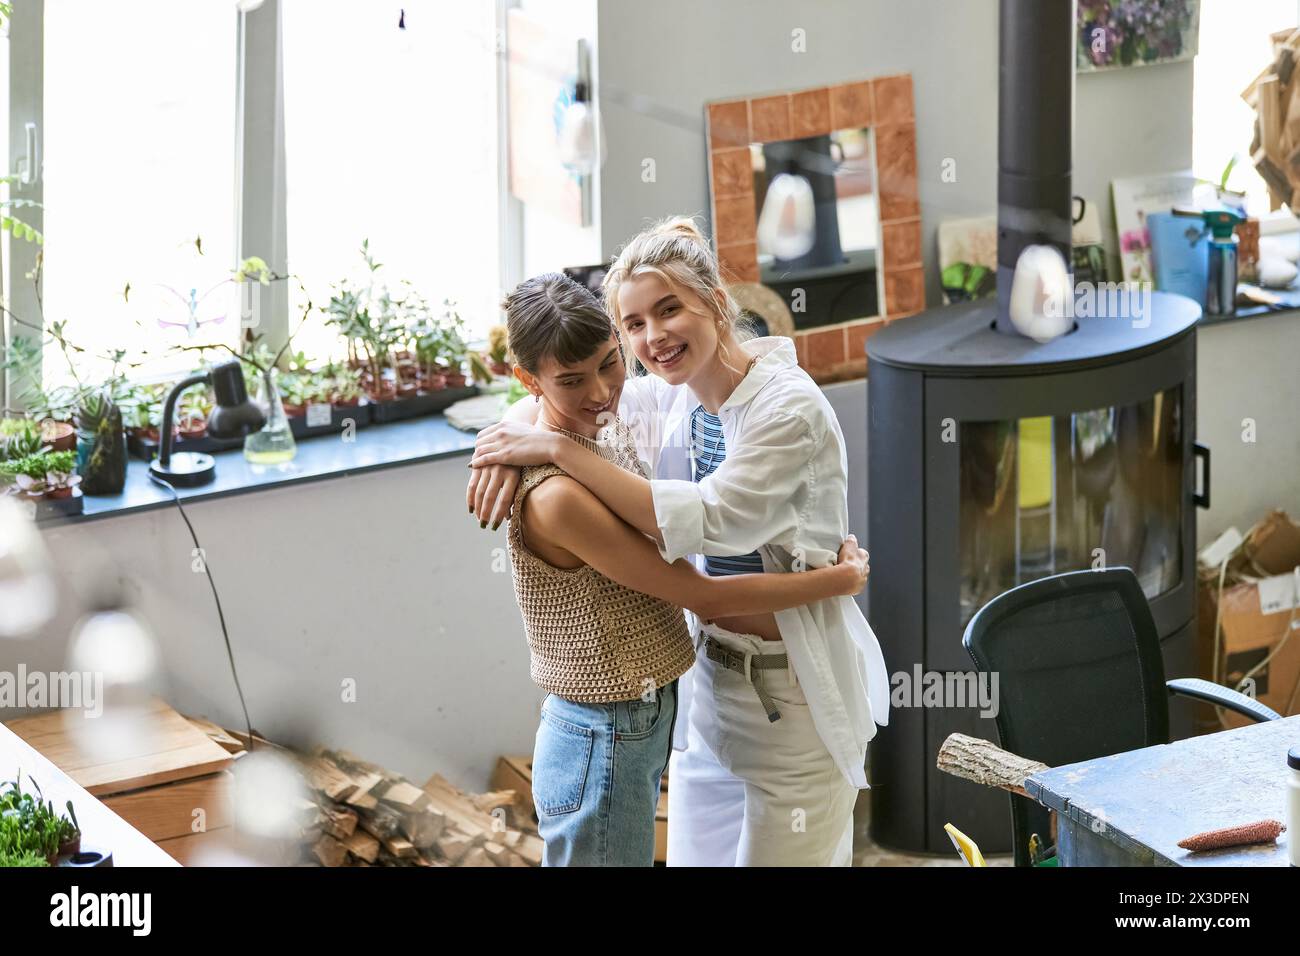 Two women, a loving lesbian couple, standing together in an art studio. Stock Photo